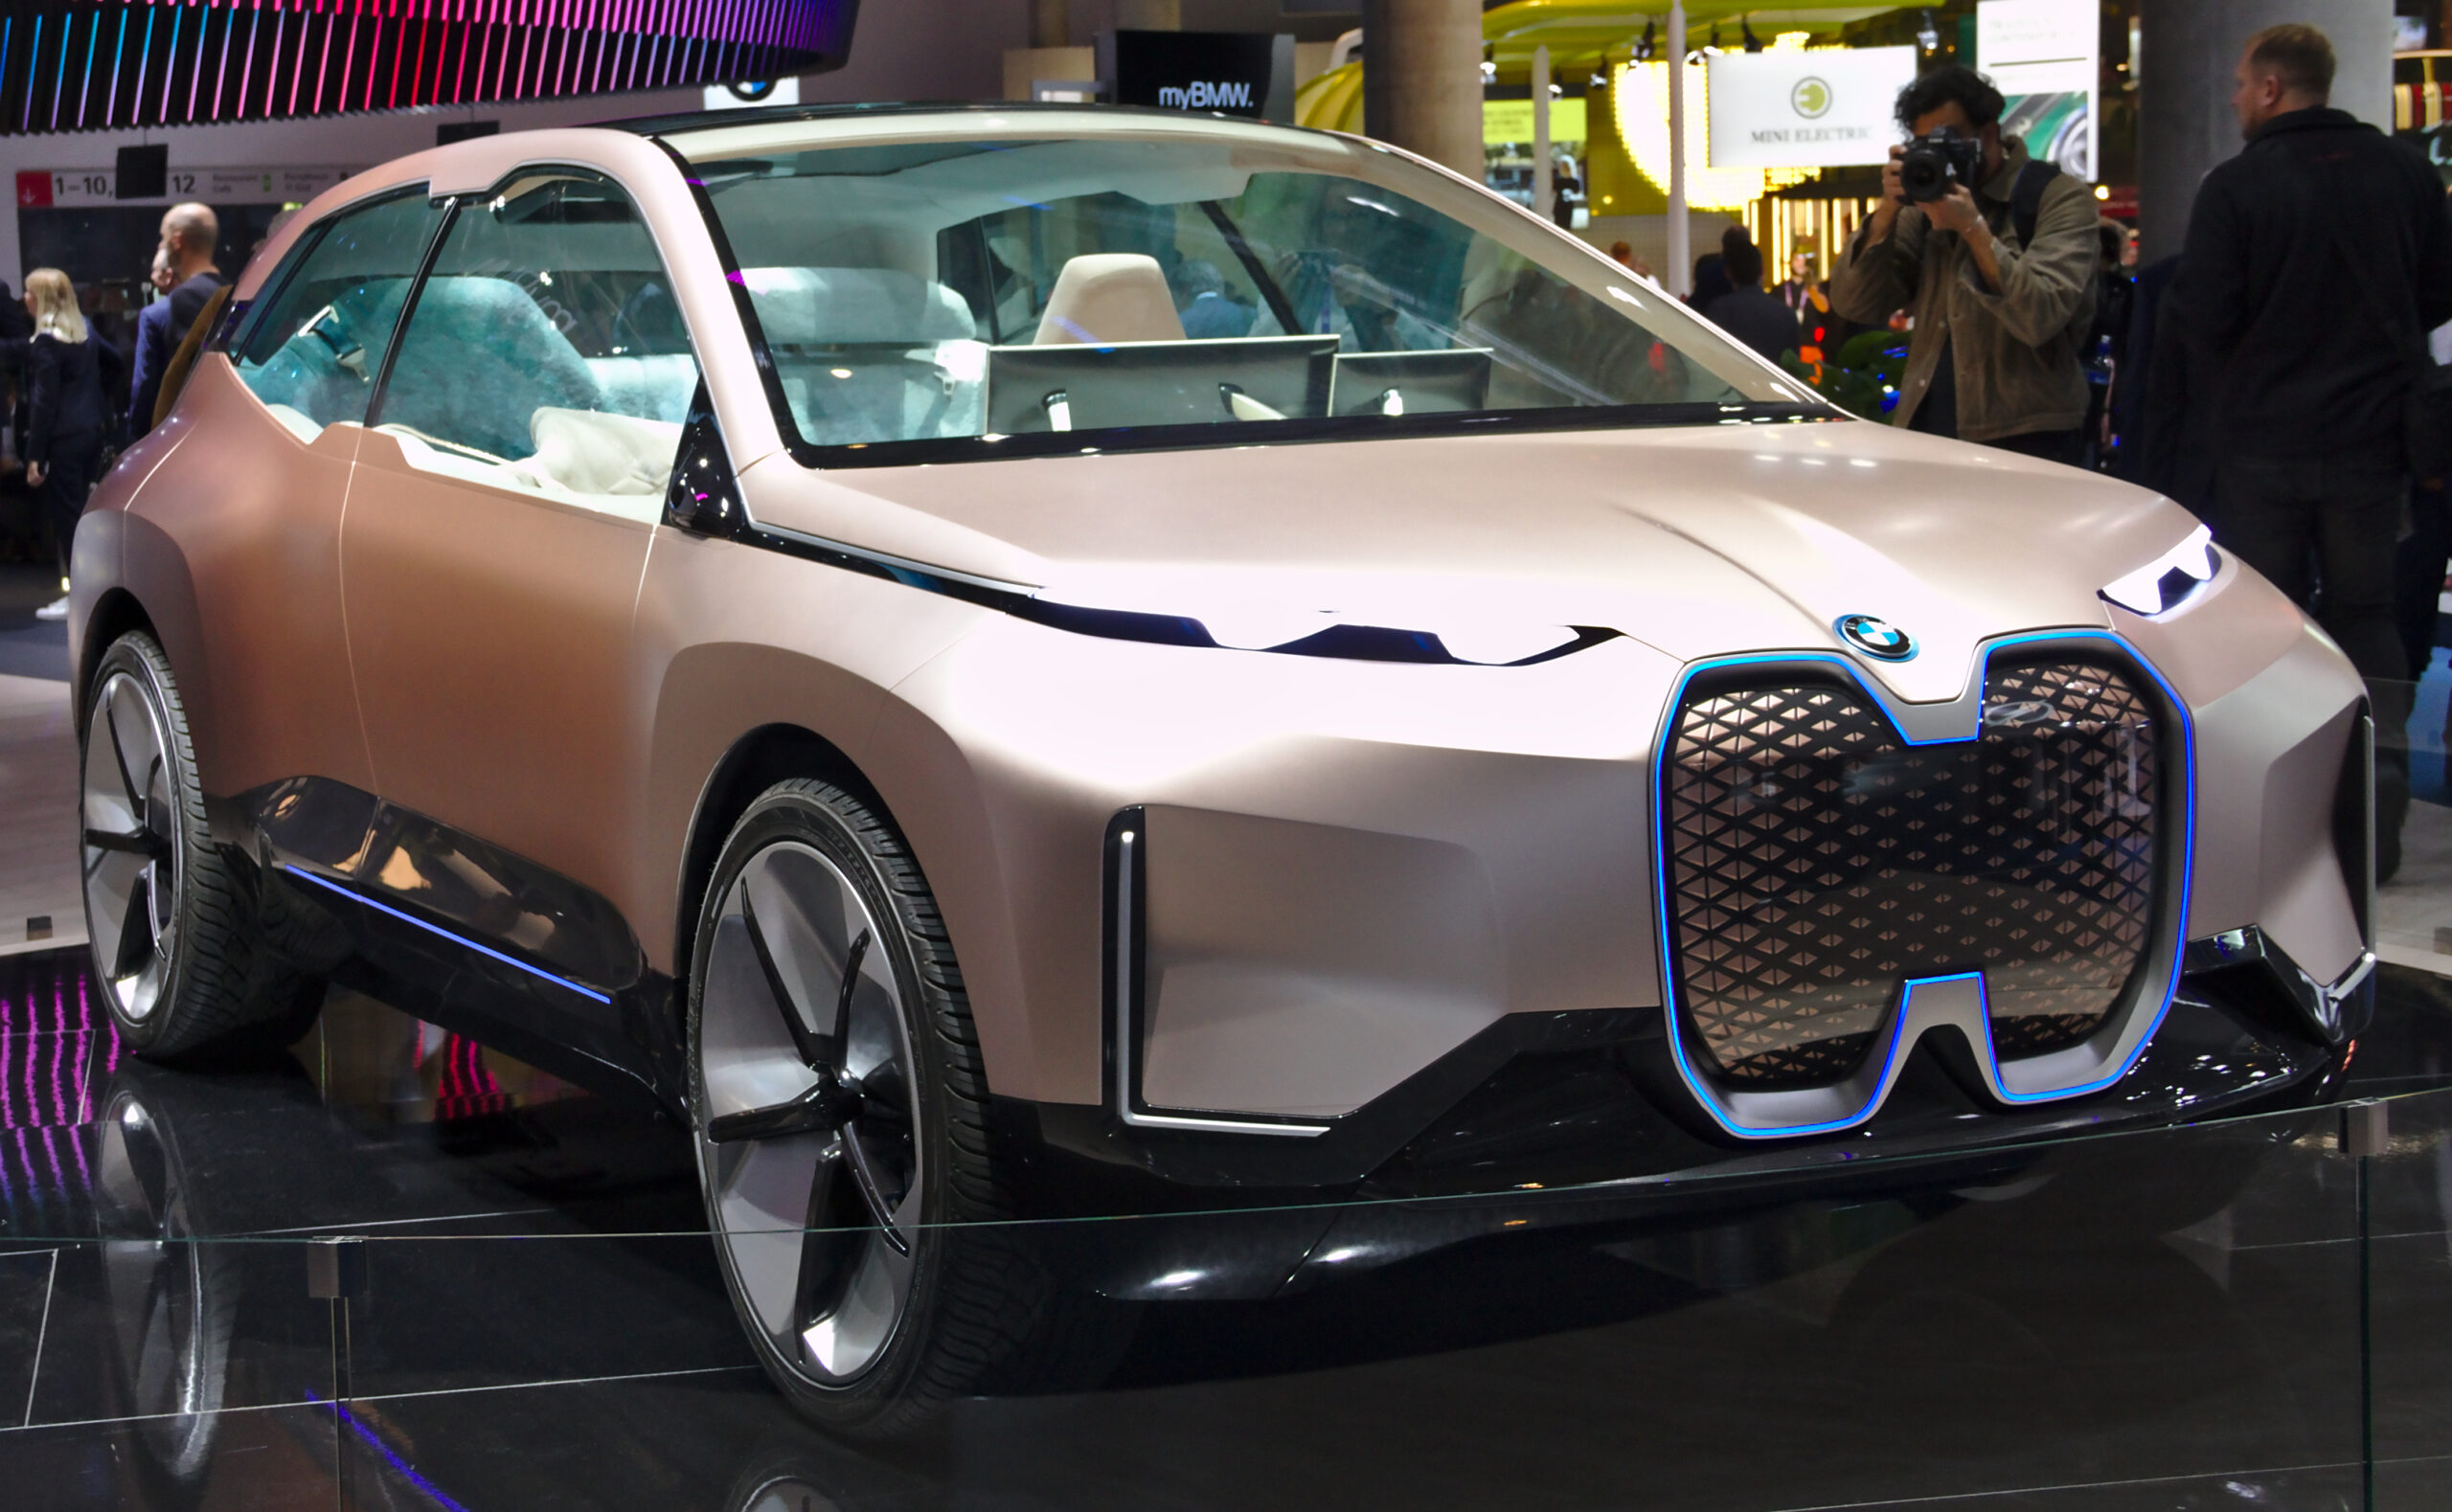 BMW i Next at IAA 2019 IMG 04941 scaled Air Conditioning In The Car